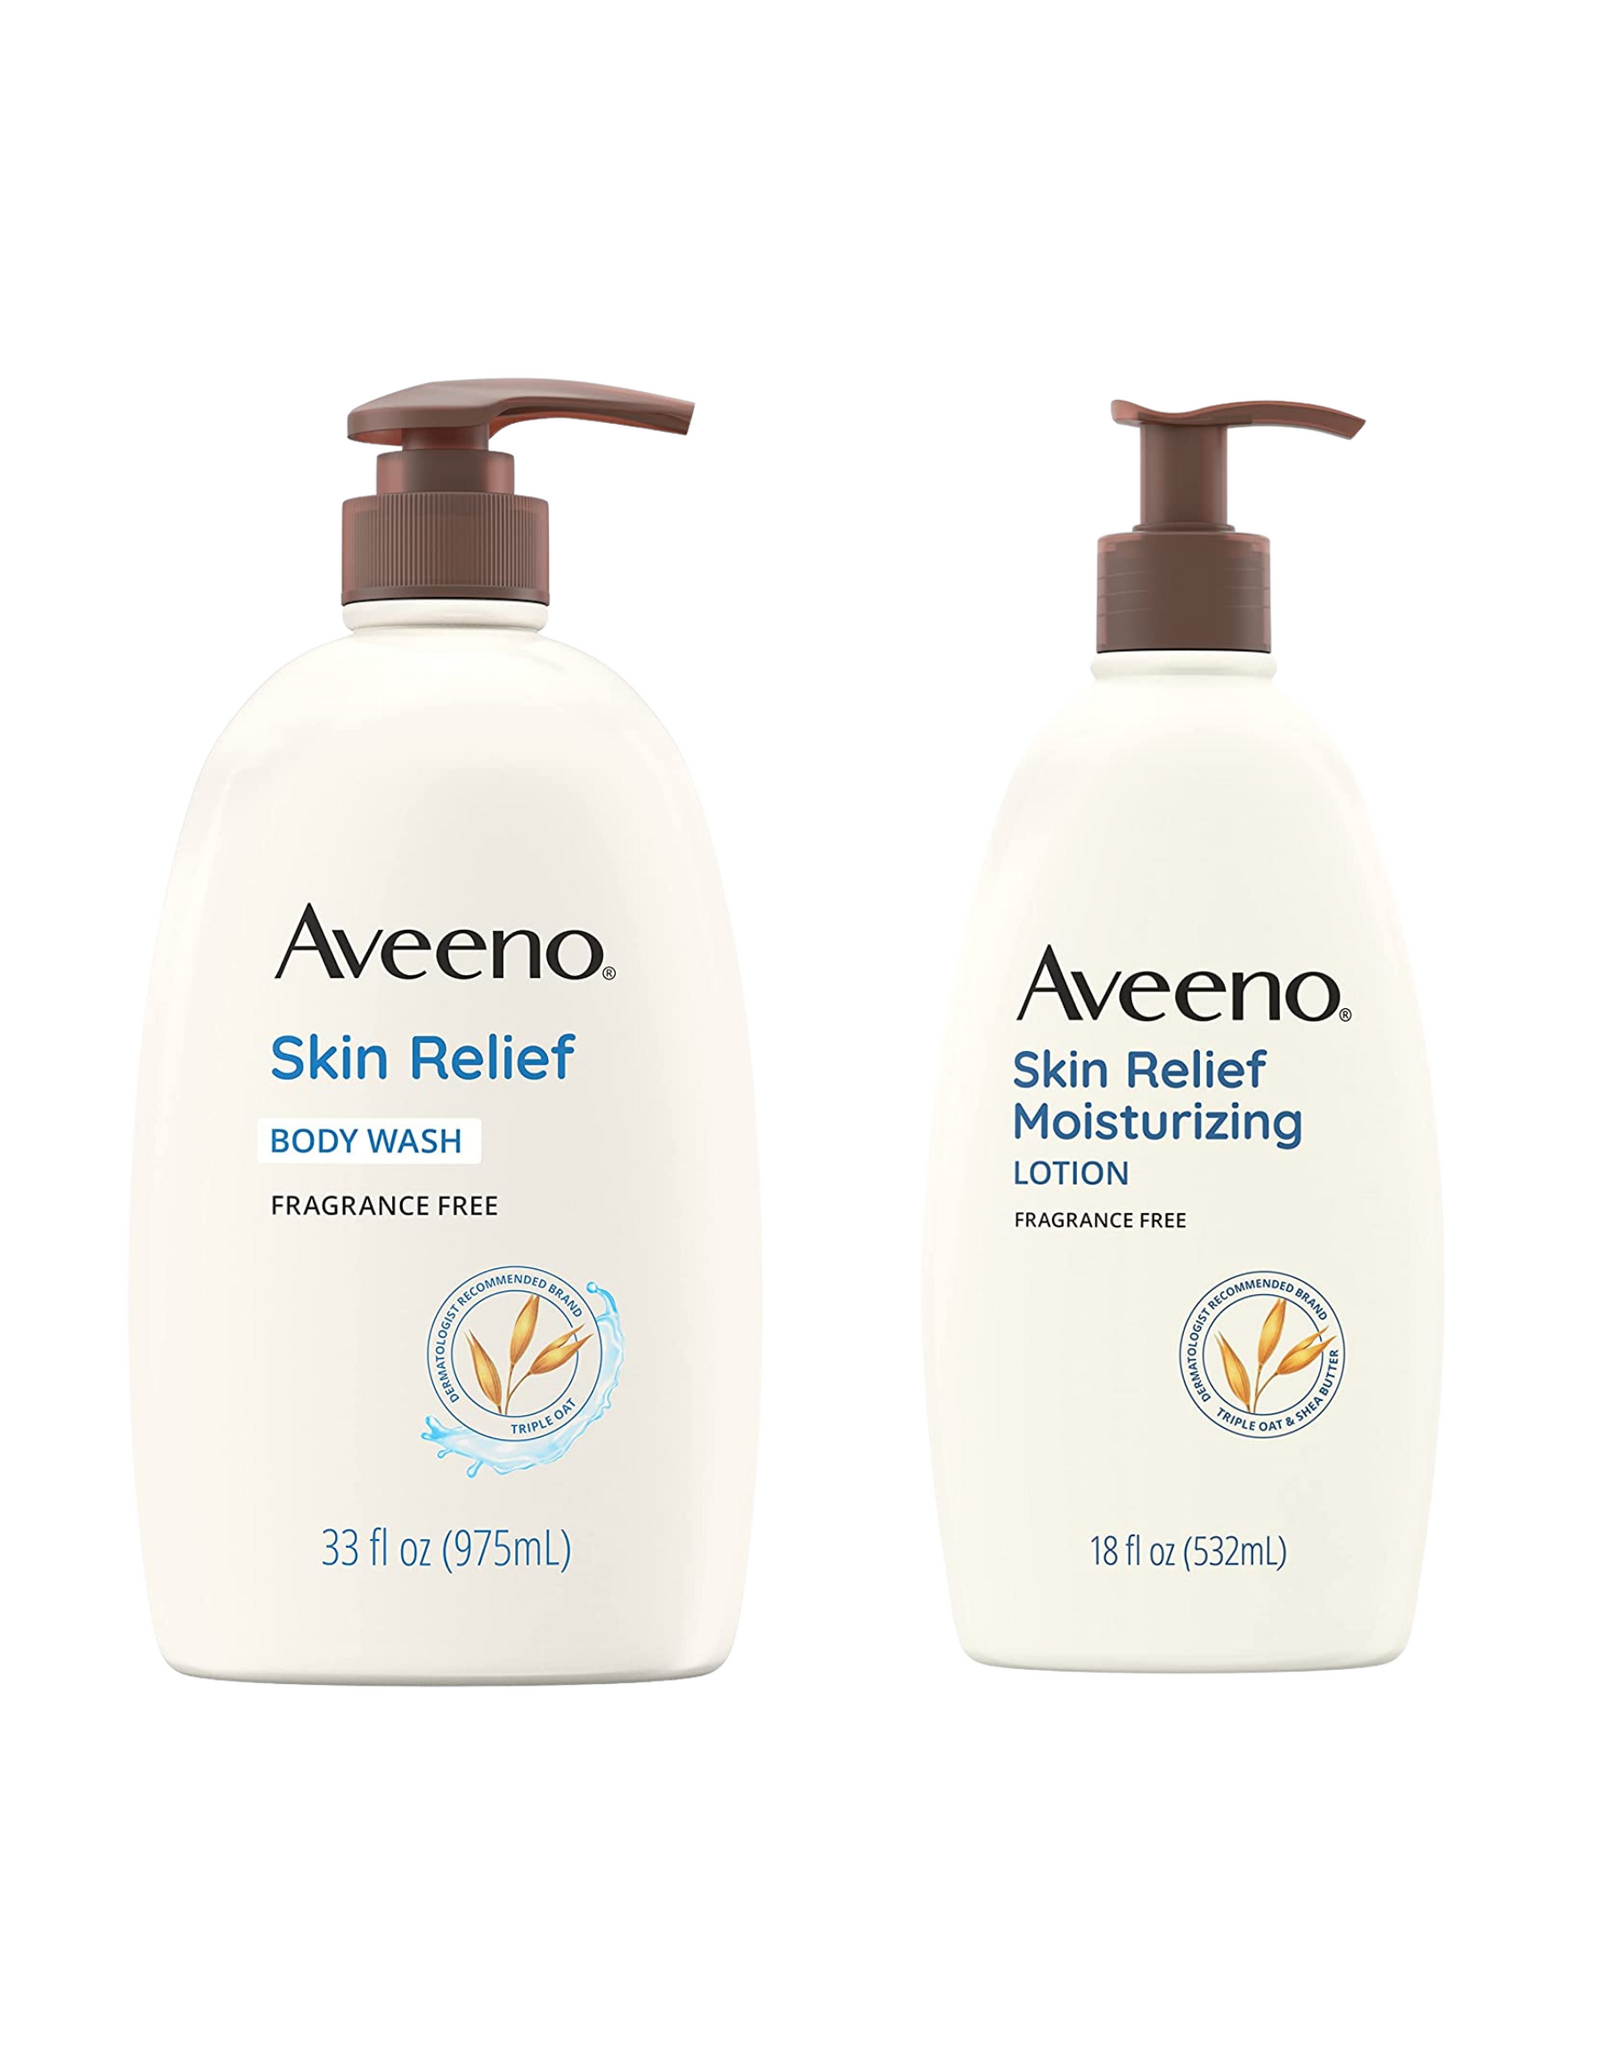 Aveeno Shea Butter Moisturizer Lotion and Skin Relief Body Wash, 51 oz in total (Pack of 2)